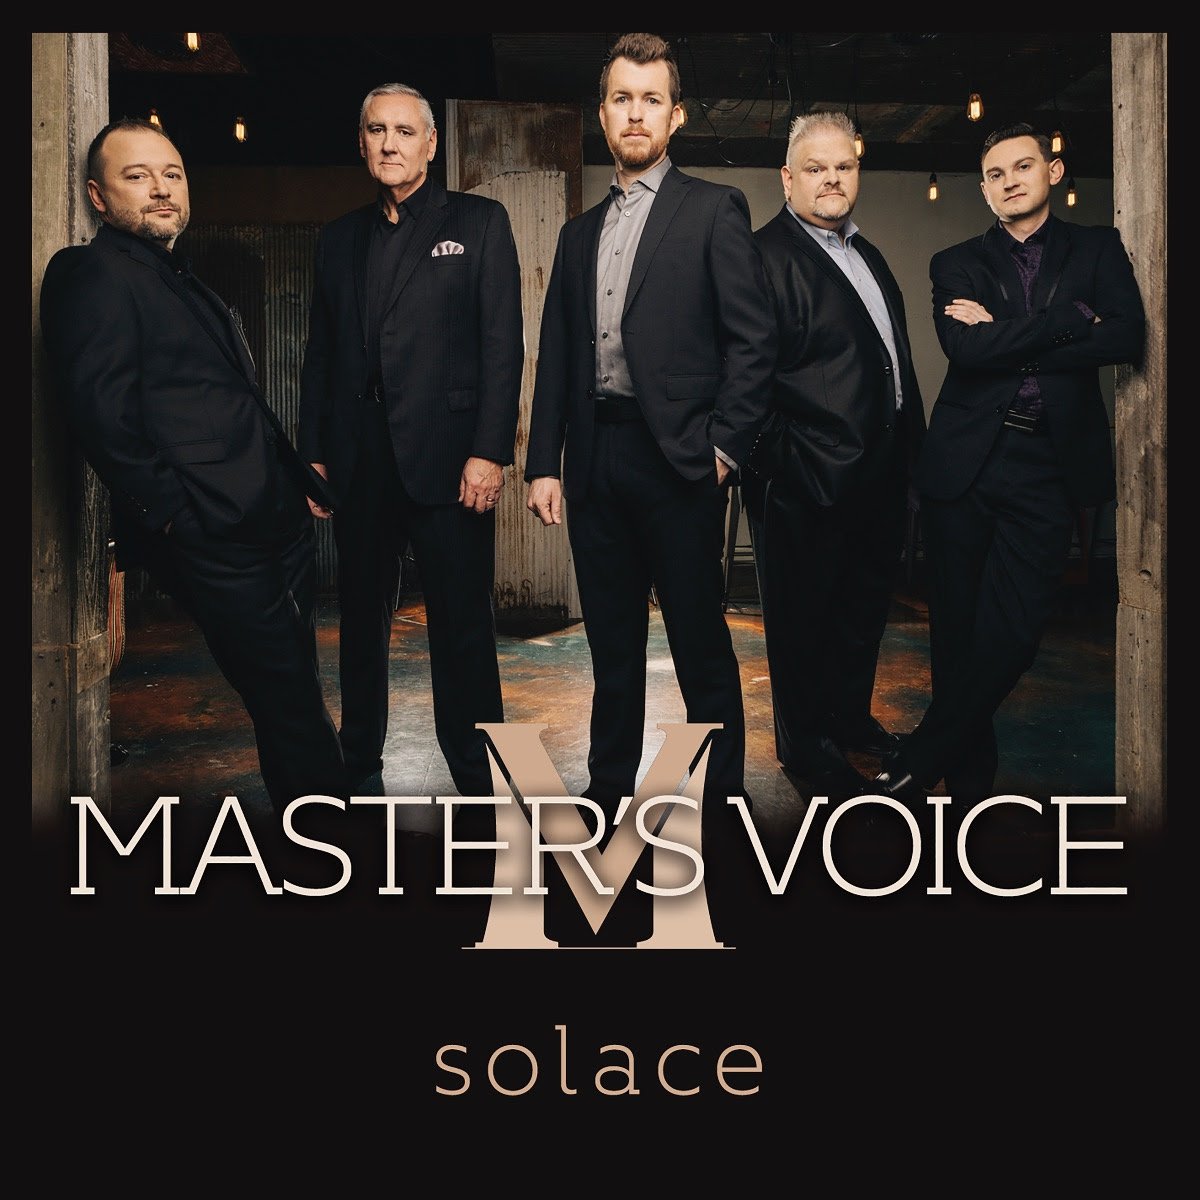 Masterâ€™s Voice releases â€˜Solace,â€™ finding peace in Godâ€™s word